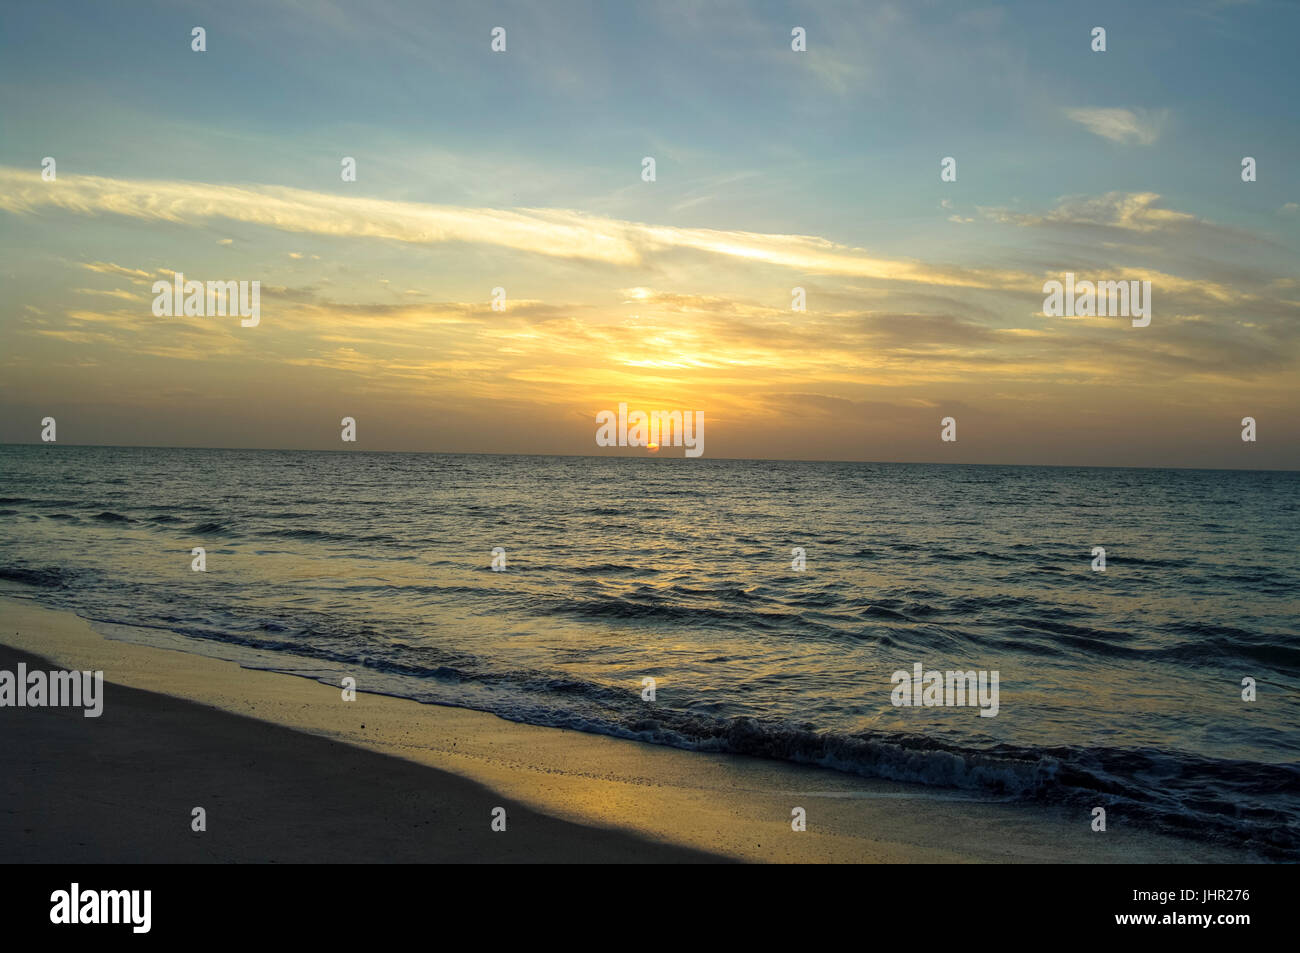 Sunrise over the Pacific ocean image taken at the beach in Playa blanca Stock Photo